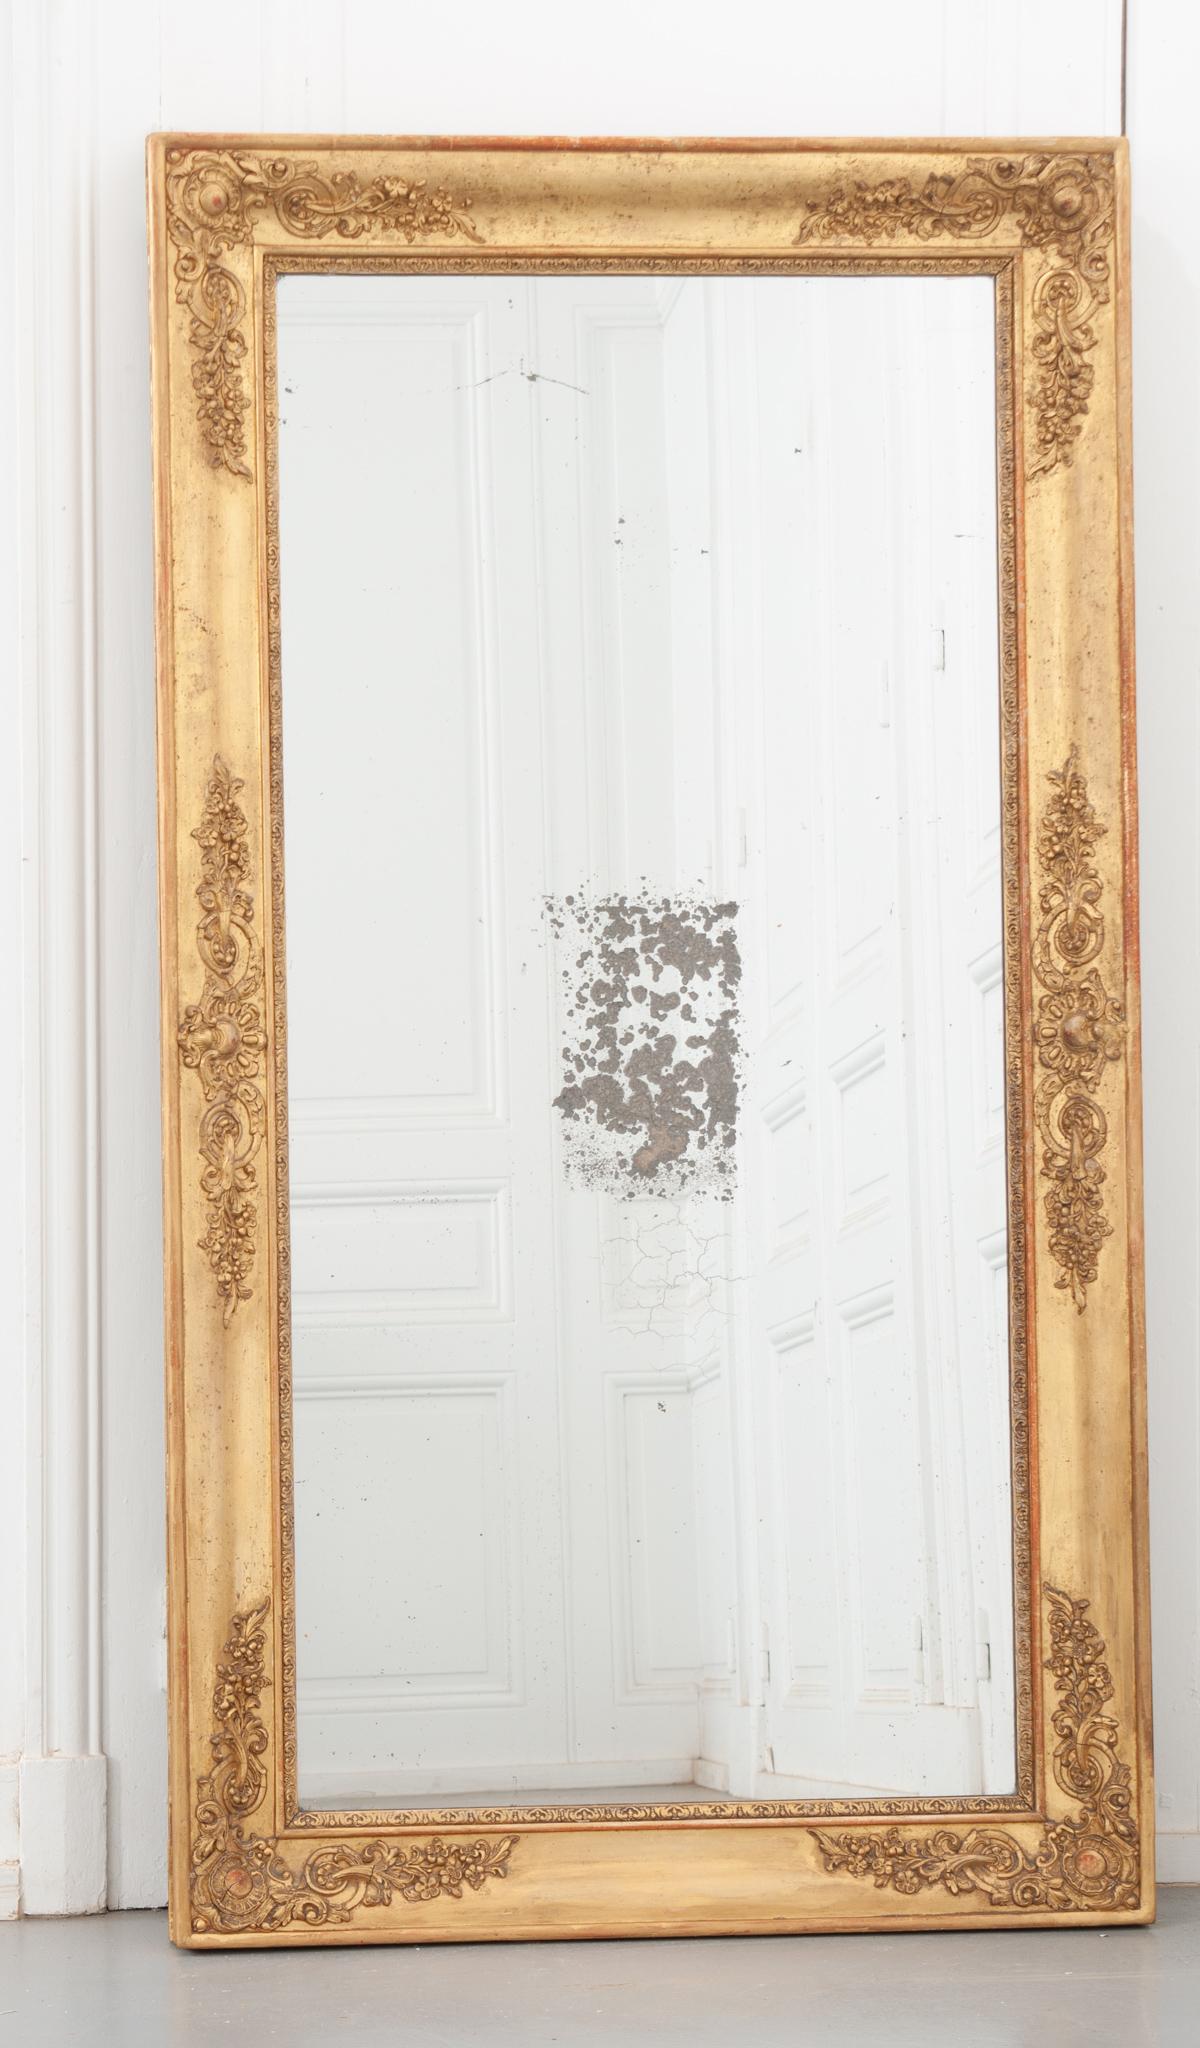 This beautiful Empire style mirror is dripping with exceptional details. The giltwood frame has a fantastic patina throughout, with spots of French red peaking through. Detailed motifs depicting a crest and lush flowered vines embellish the frames